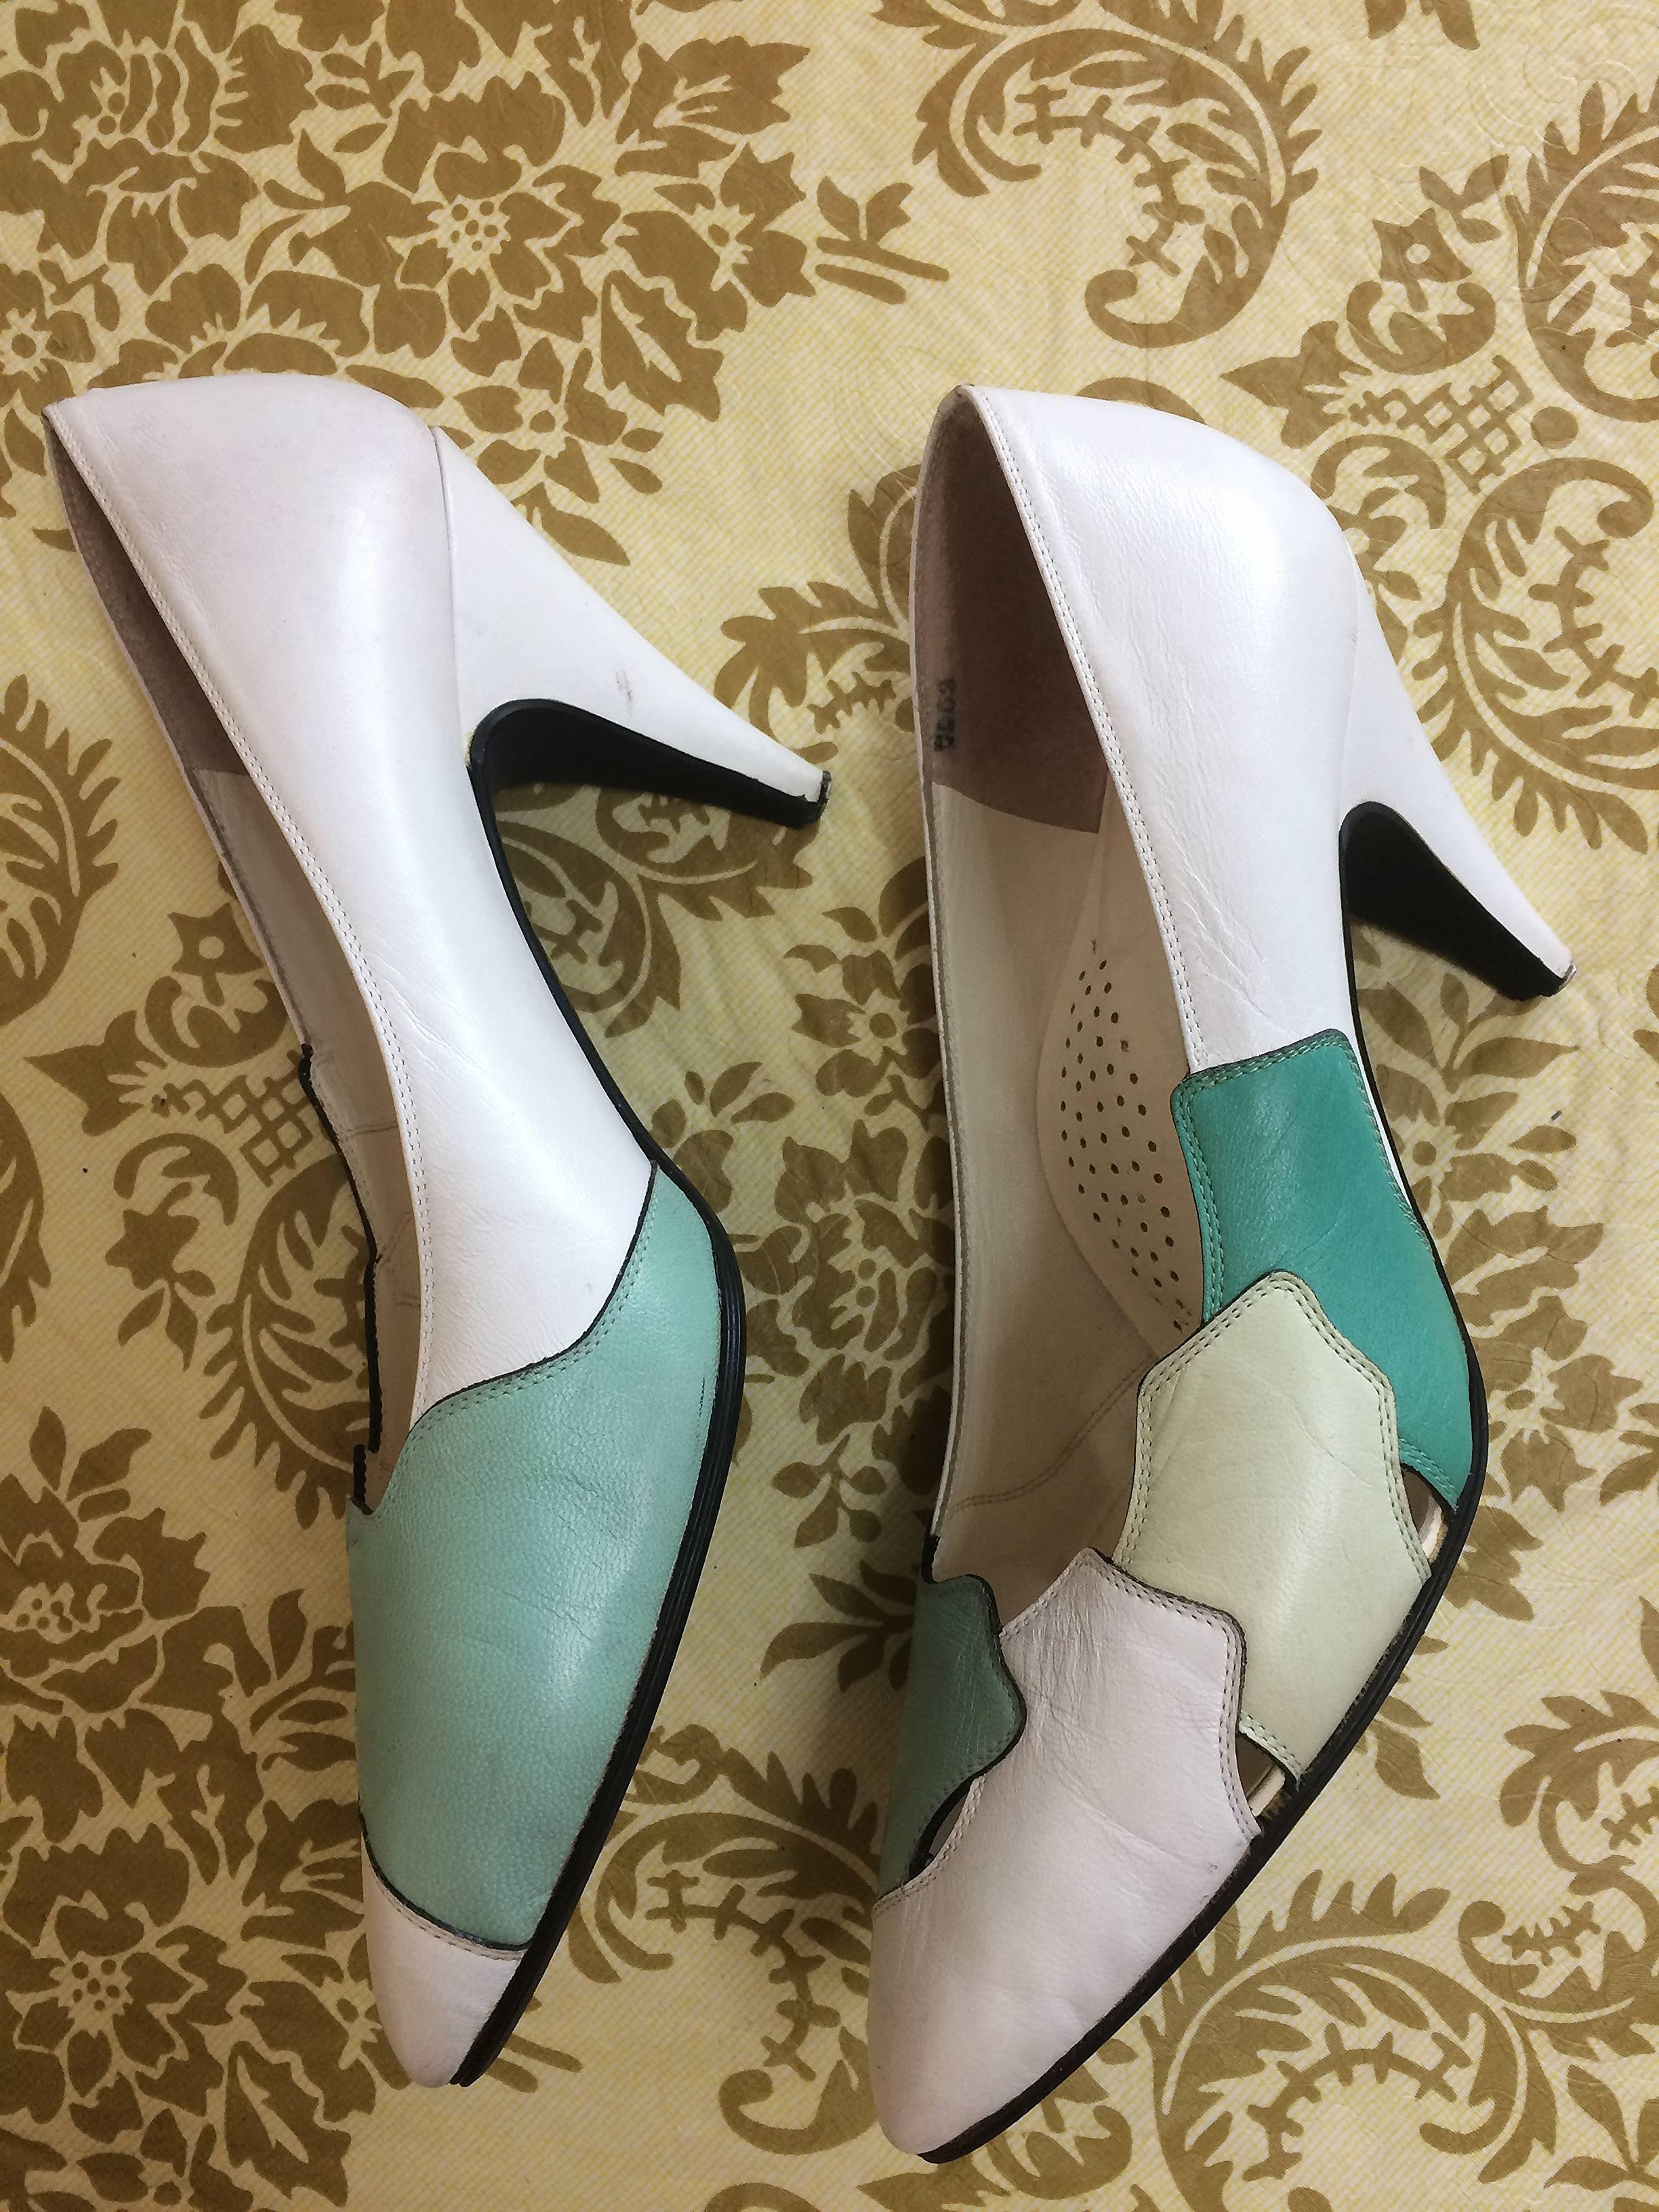 1990s. Vintage LANVIN white, light green, and green layered leather shoes, pumps with mod, geometric design.  US6, 6.5 Made in Japan

This is a vintage pair of shoes, pumps in white, light green, and green layered and geometric design from LANVIN